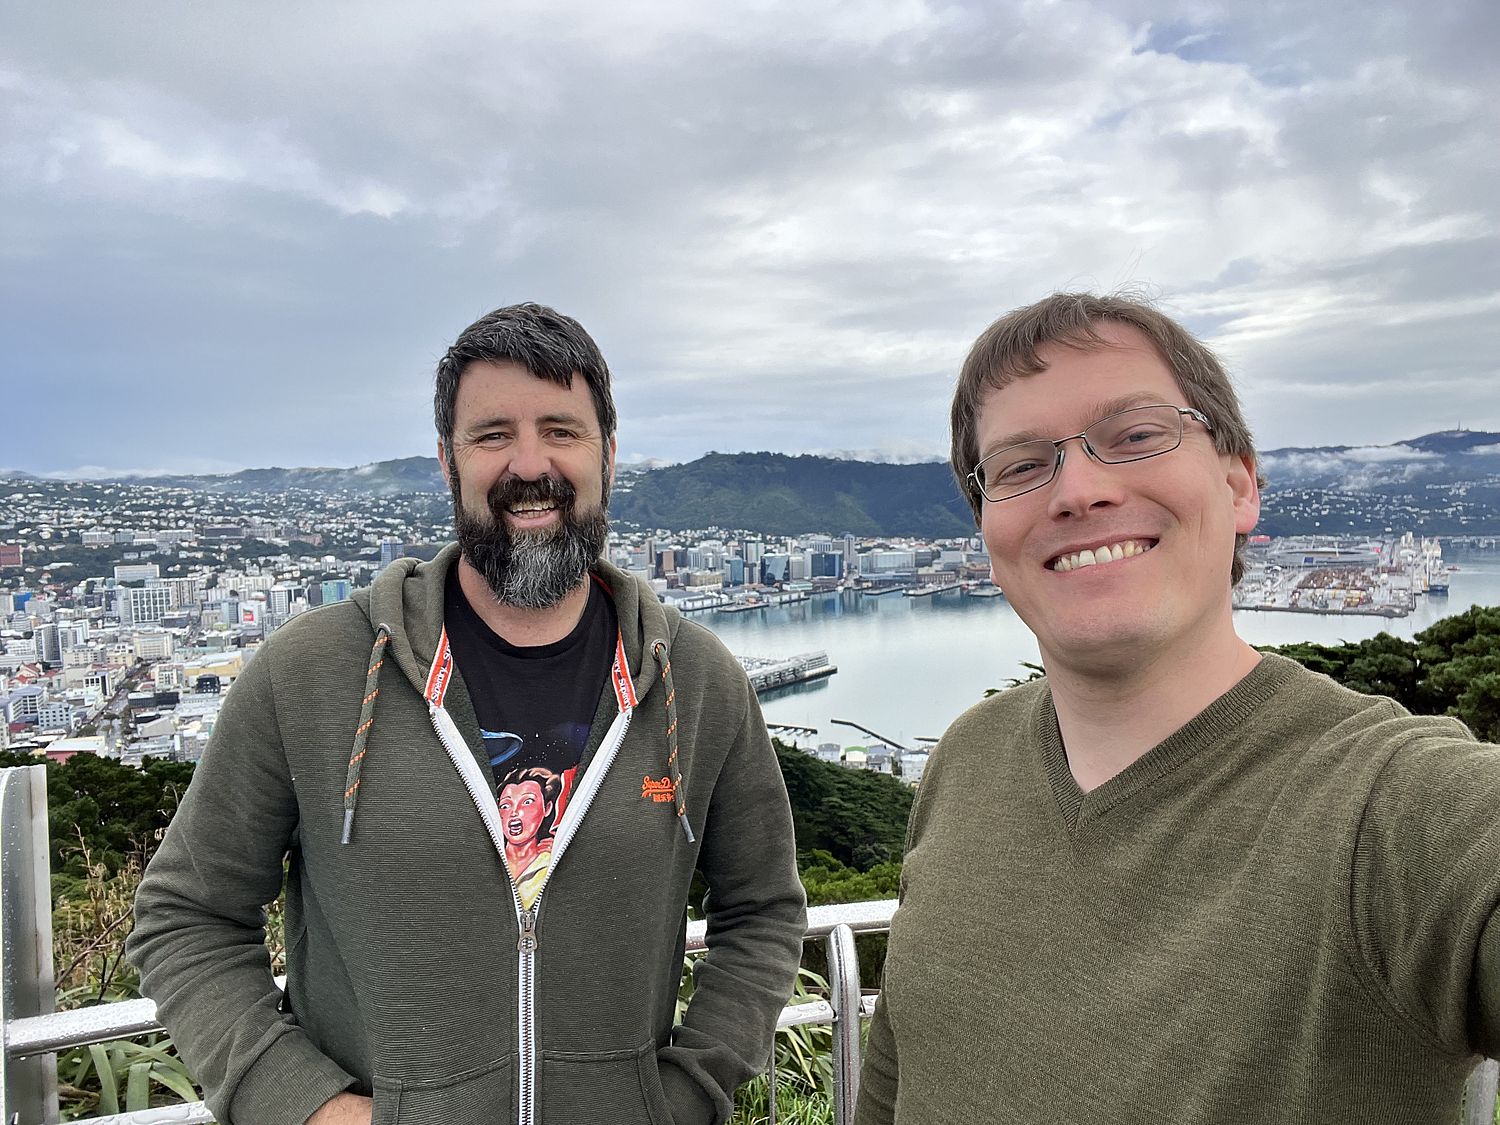 Photo of two men, smiling, with a city in the background.